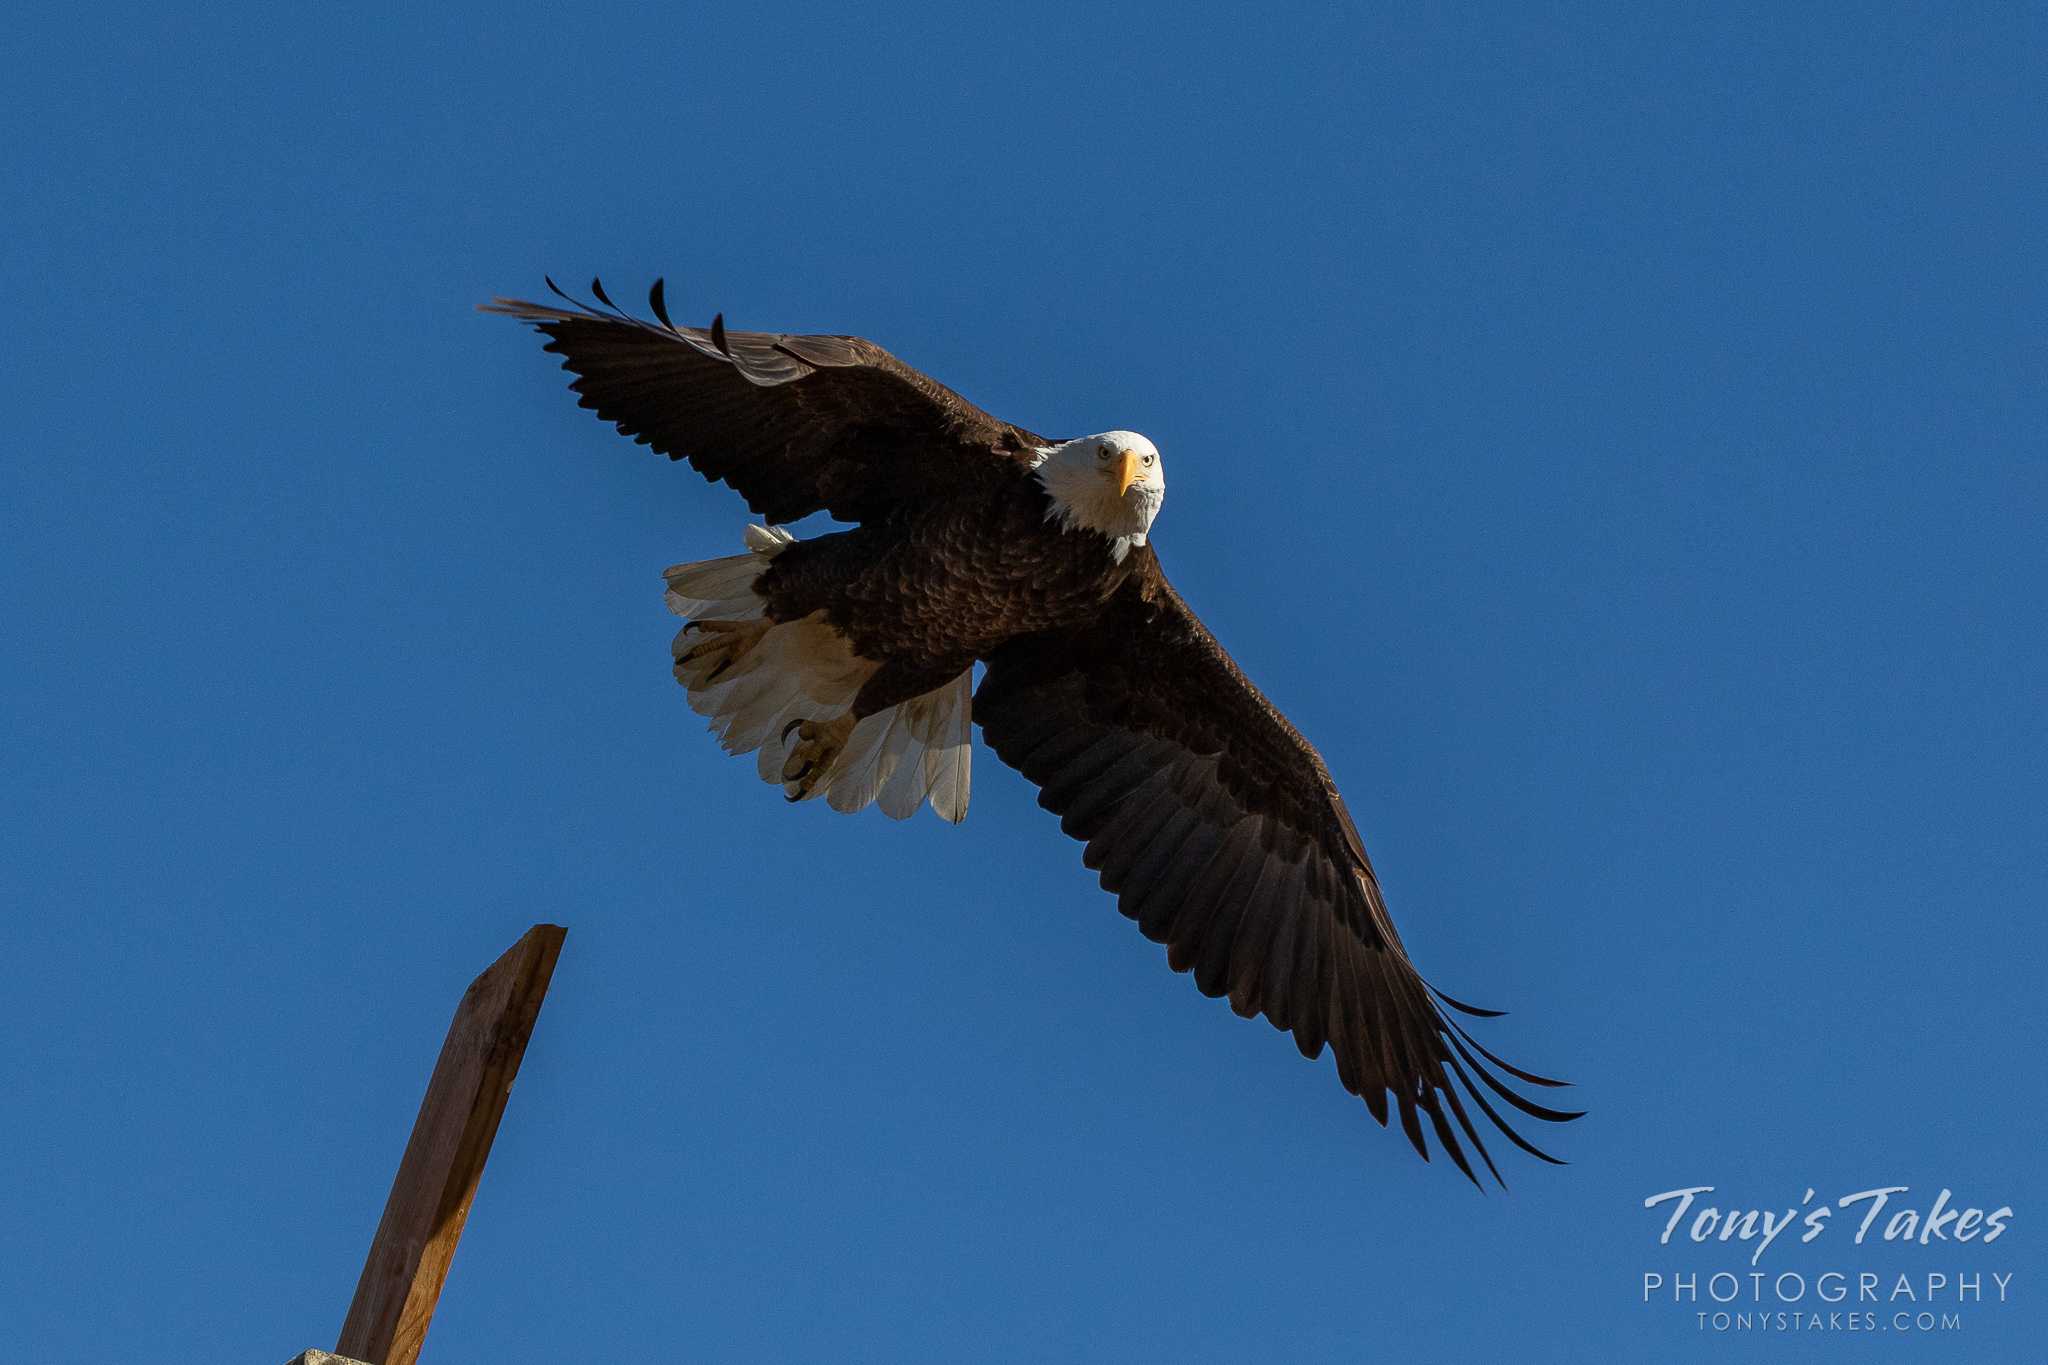 A male bald eagle launches into the sky in Weld County, Colorado while his mate looks on. (© Tony’s Takes)